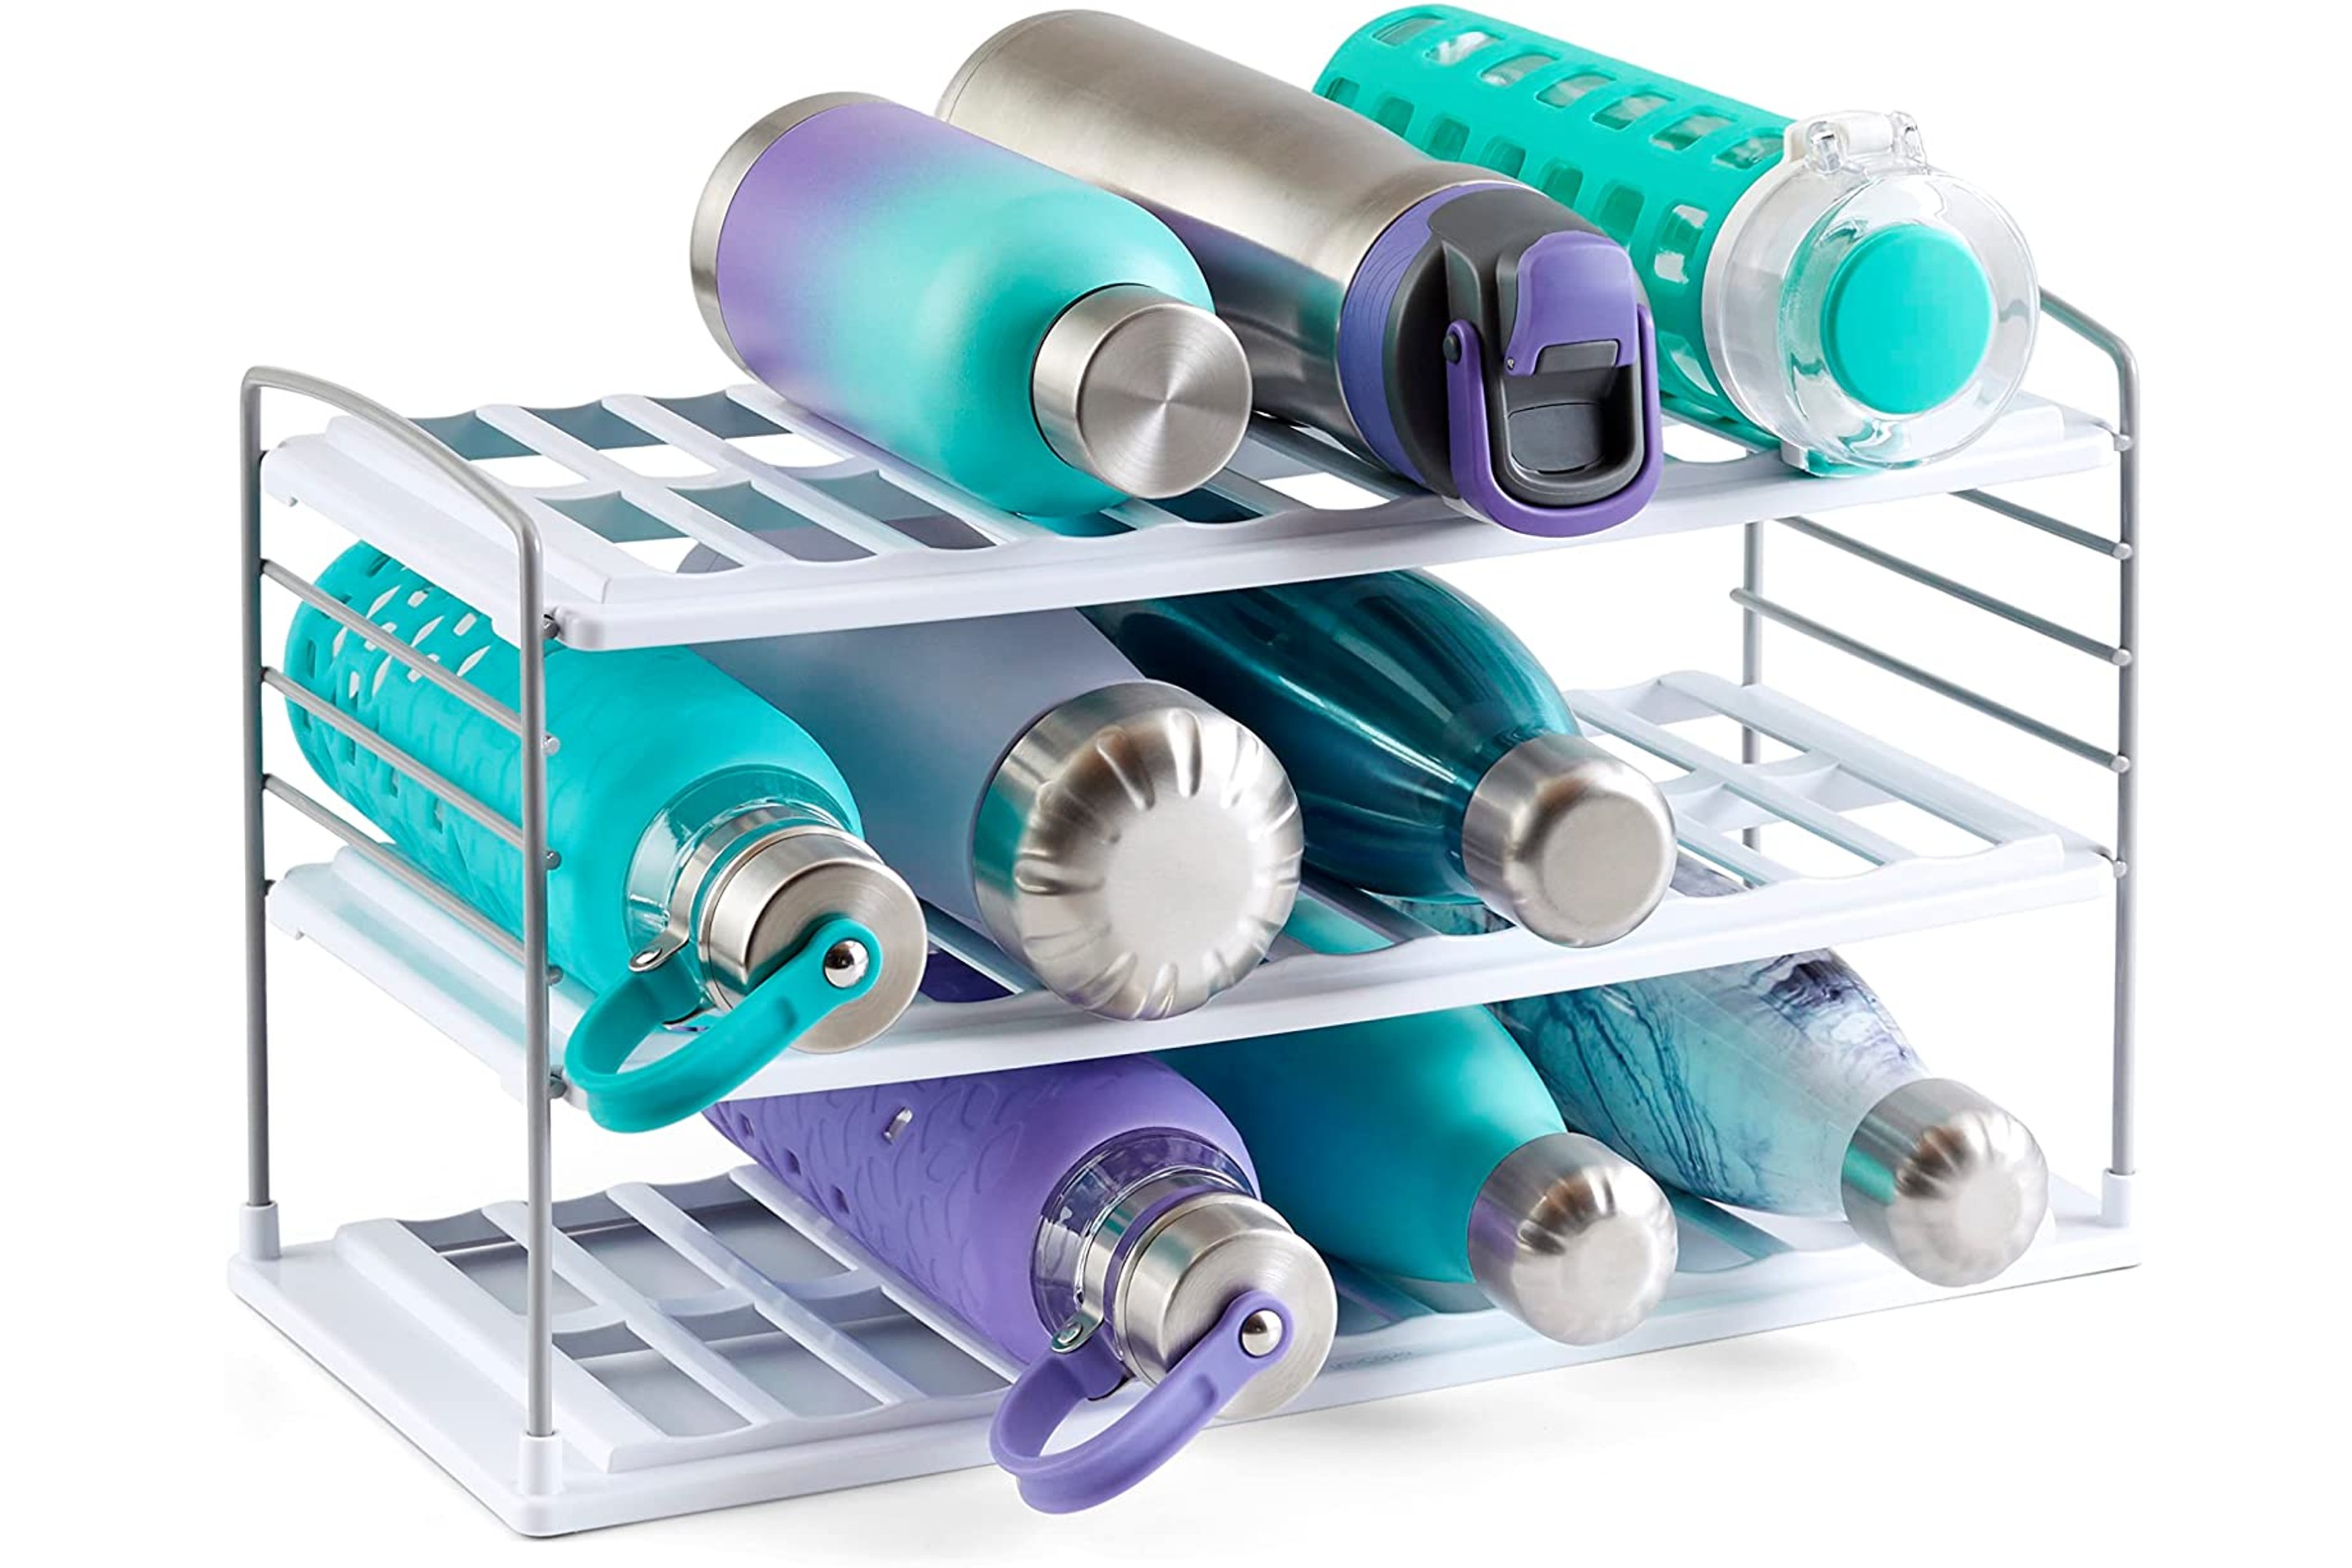 Save on Top Home Organizing Gadgets